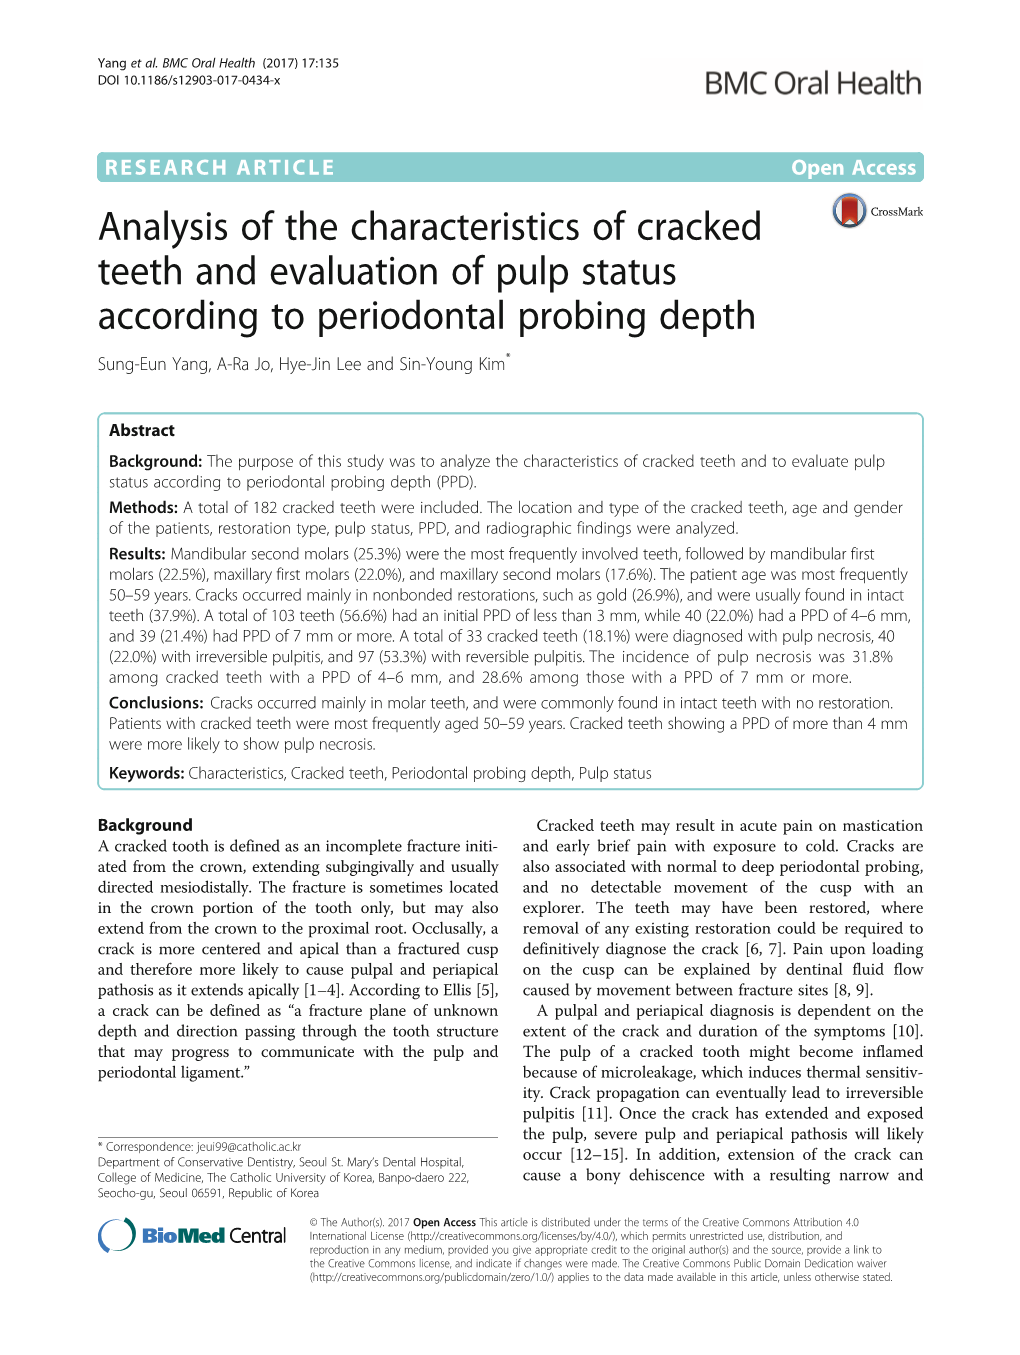 Analysis of the Characteristics of Cracked Teeth and Evaluation Of